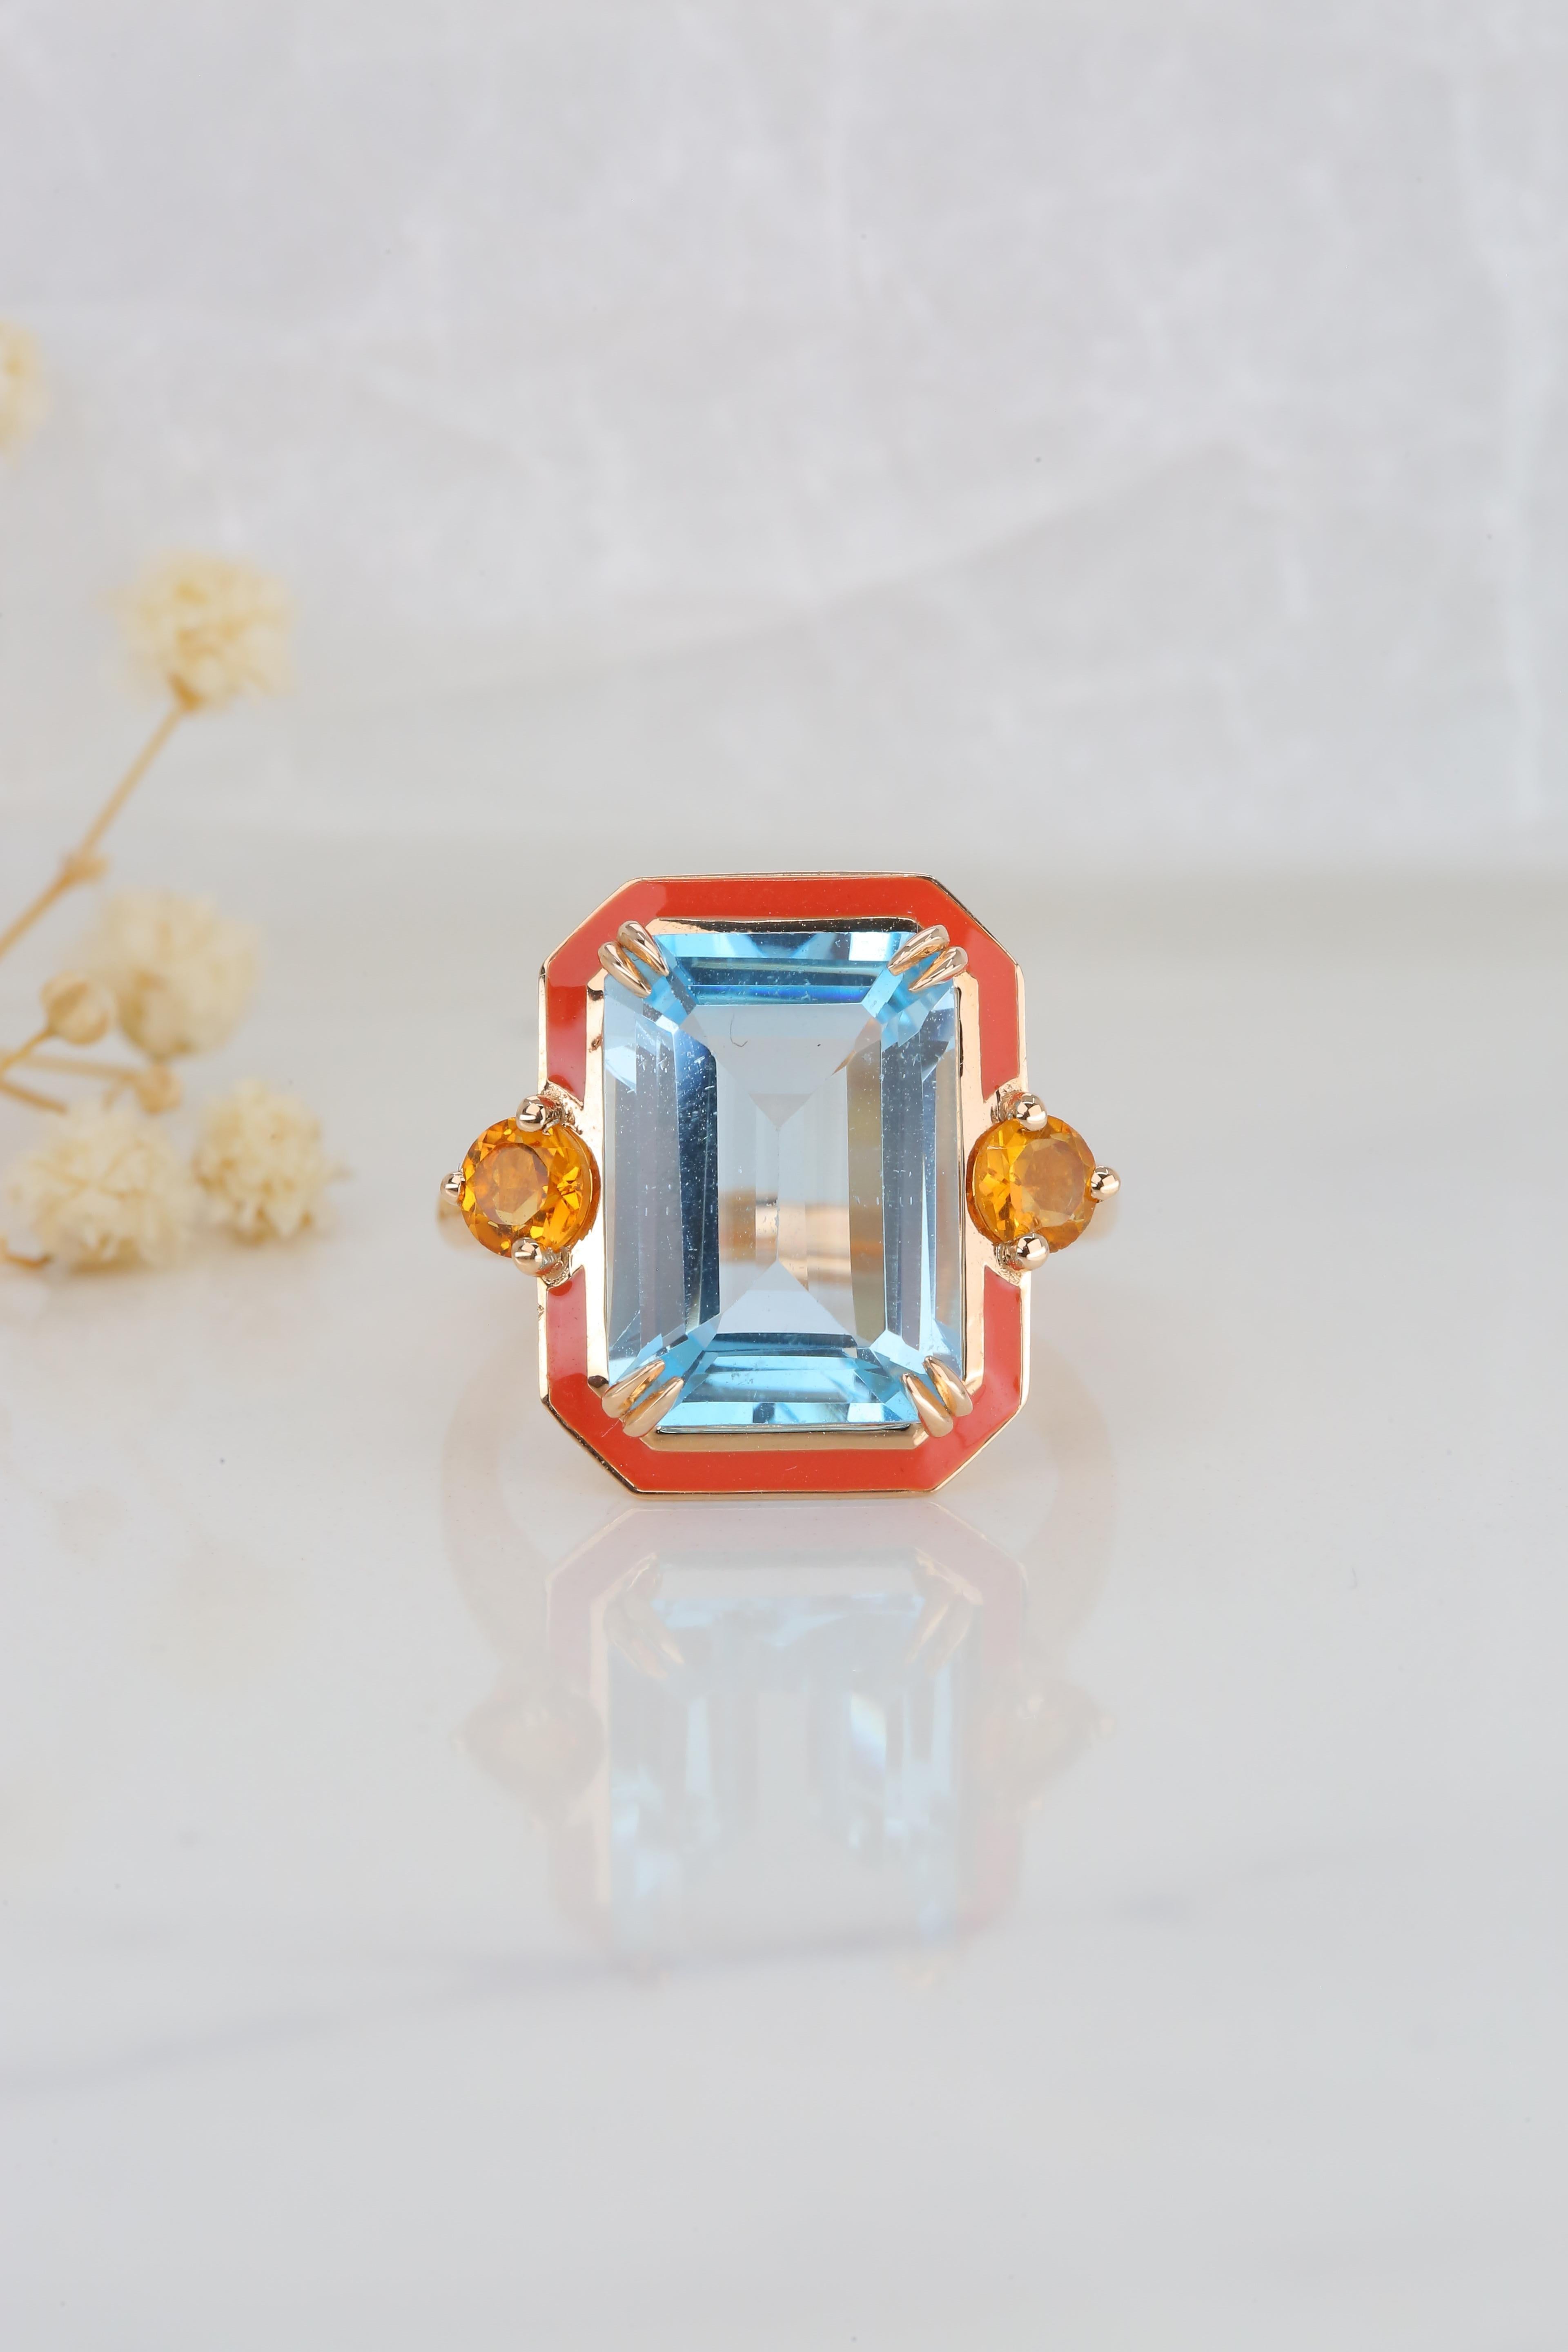 For Sale:  14K Gold Artdeco Style Enameled Cocktail Ring with 5.68 Ct Sky Topaz and Citrine 6